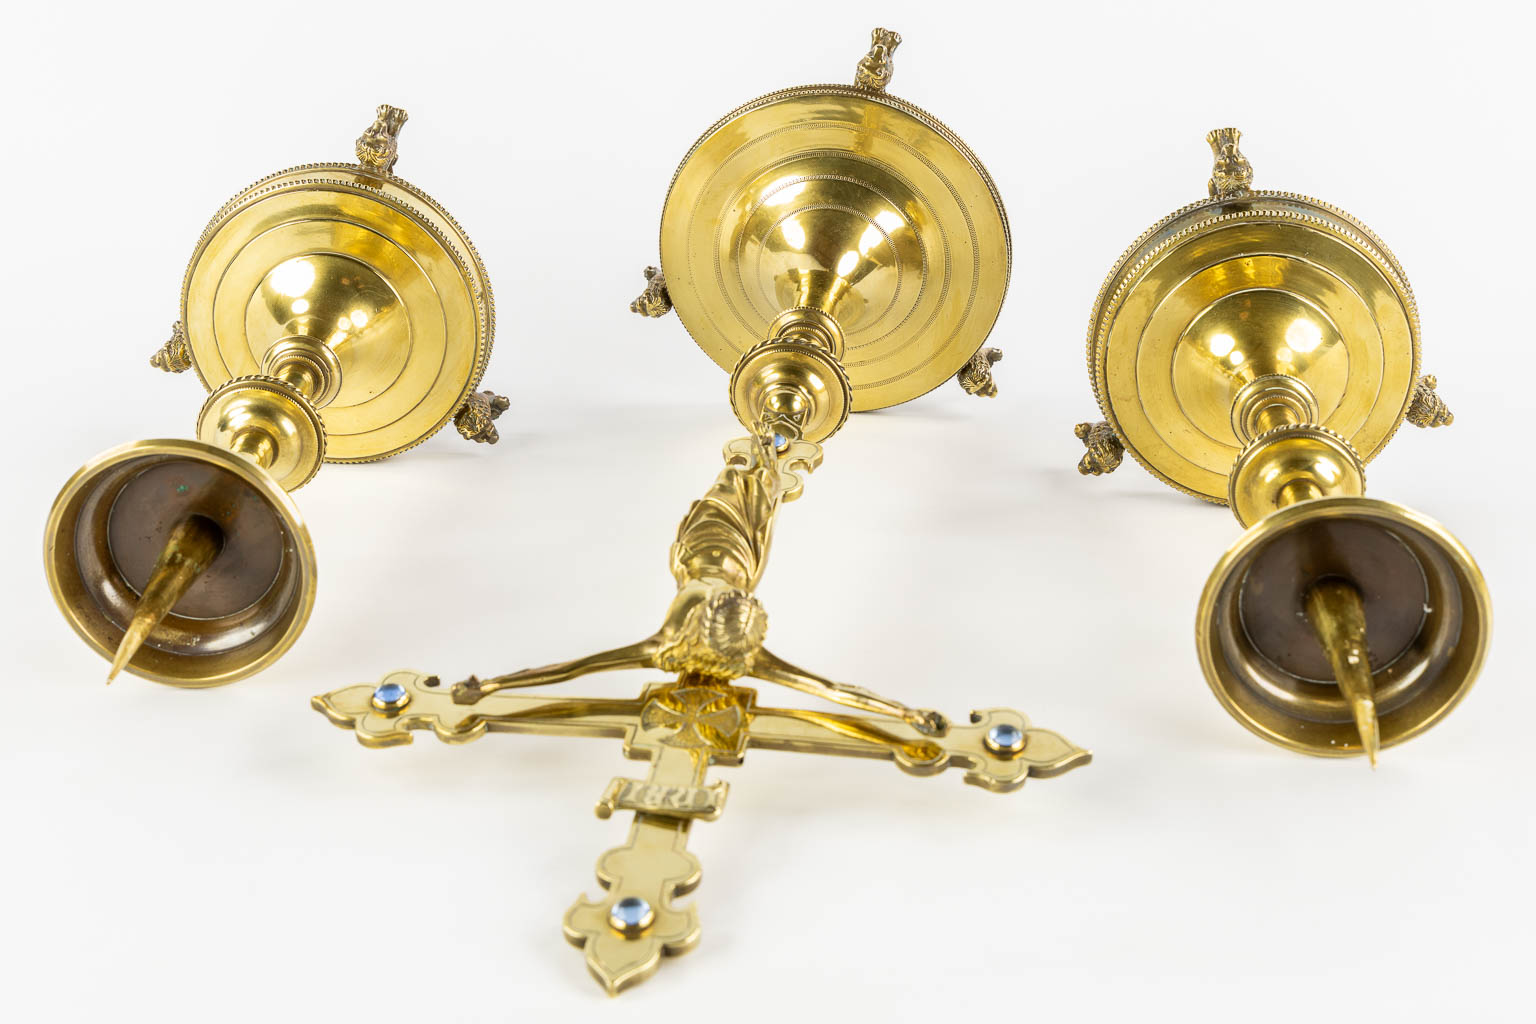 An altar crucifix and matching candelabra, Brass, Gothic revival, probably made by Bourdon, Ghent. (L:21 x W:27,5 x H:57,5 cm)